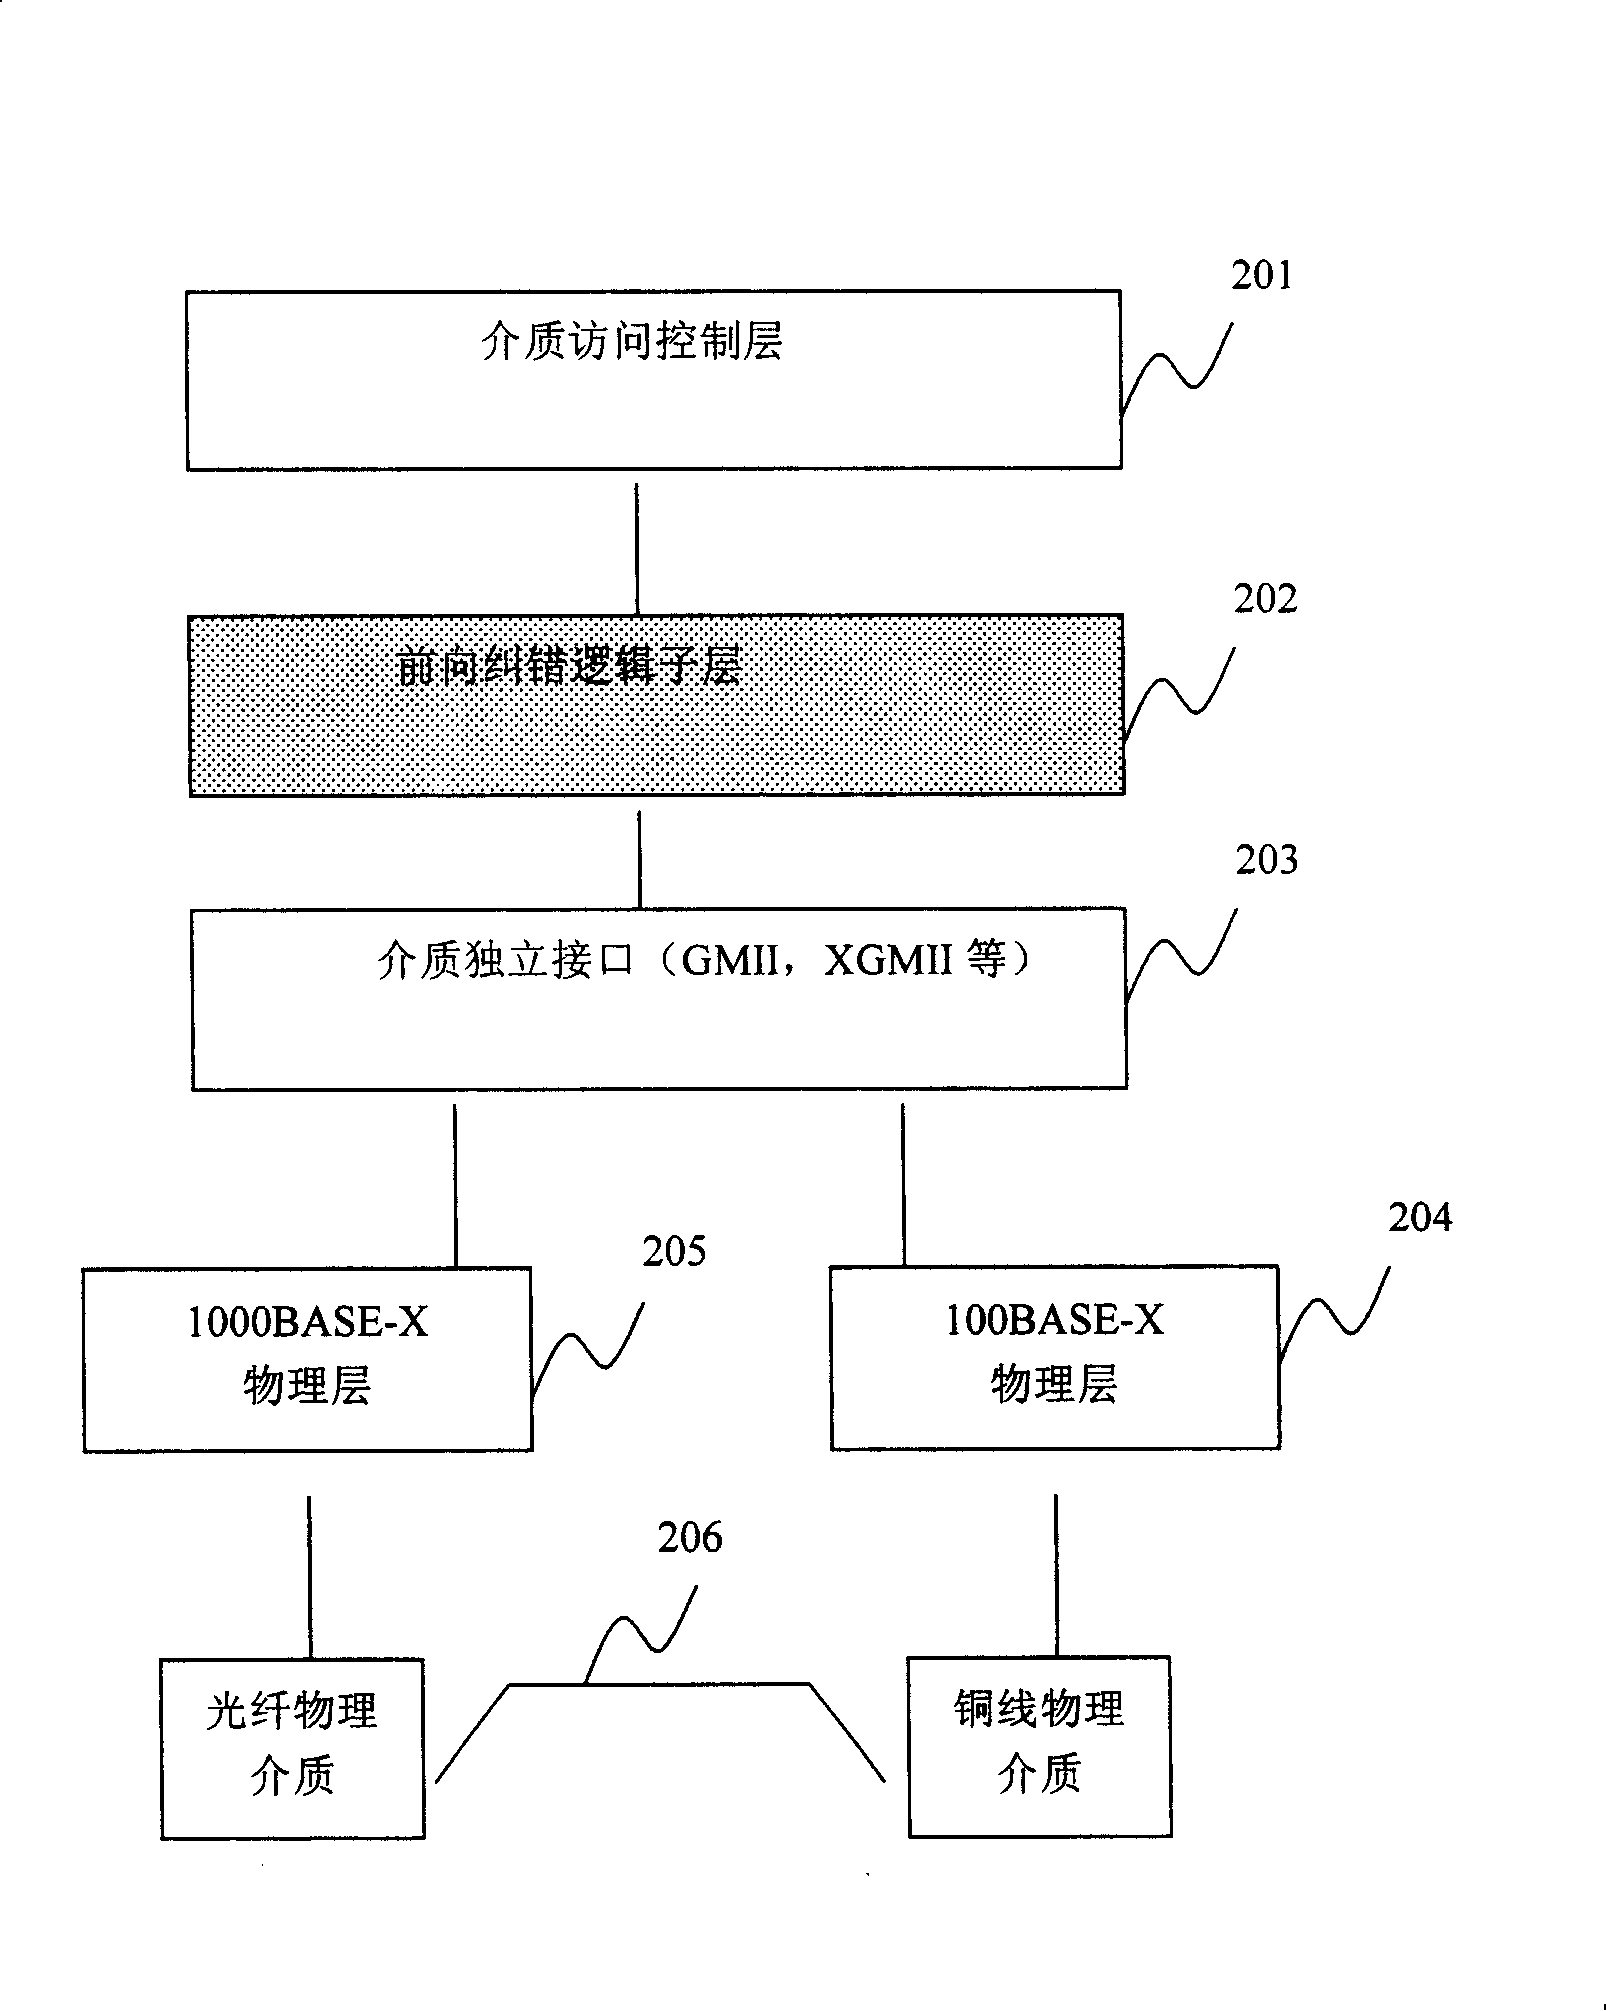 Communication method and device for application forward error correction mechanism of carrier-class Ethernet